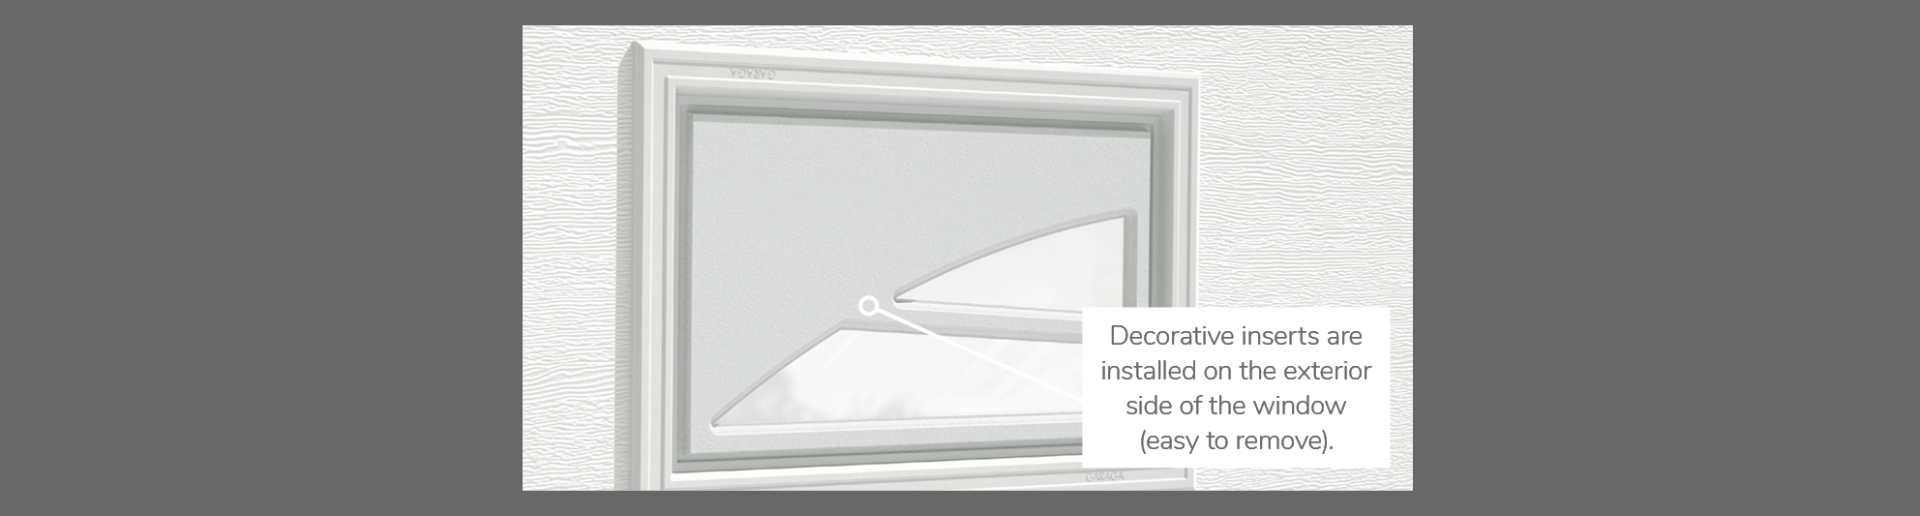 Williamsburg Decorative Insert, 20" x 13", available for door 3 layers - Polystyrene, 2 layers - Polystyrene and Non-insulated